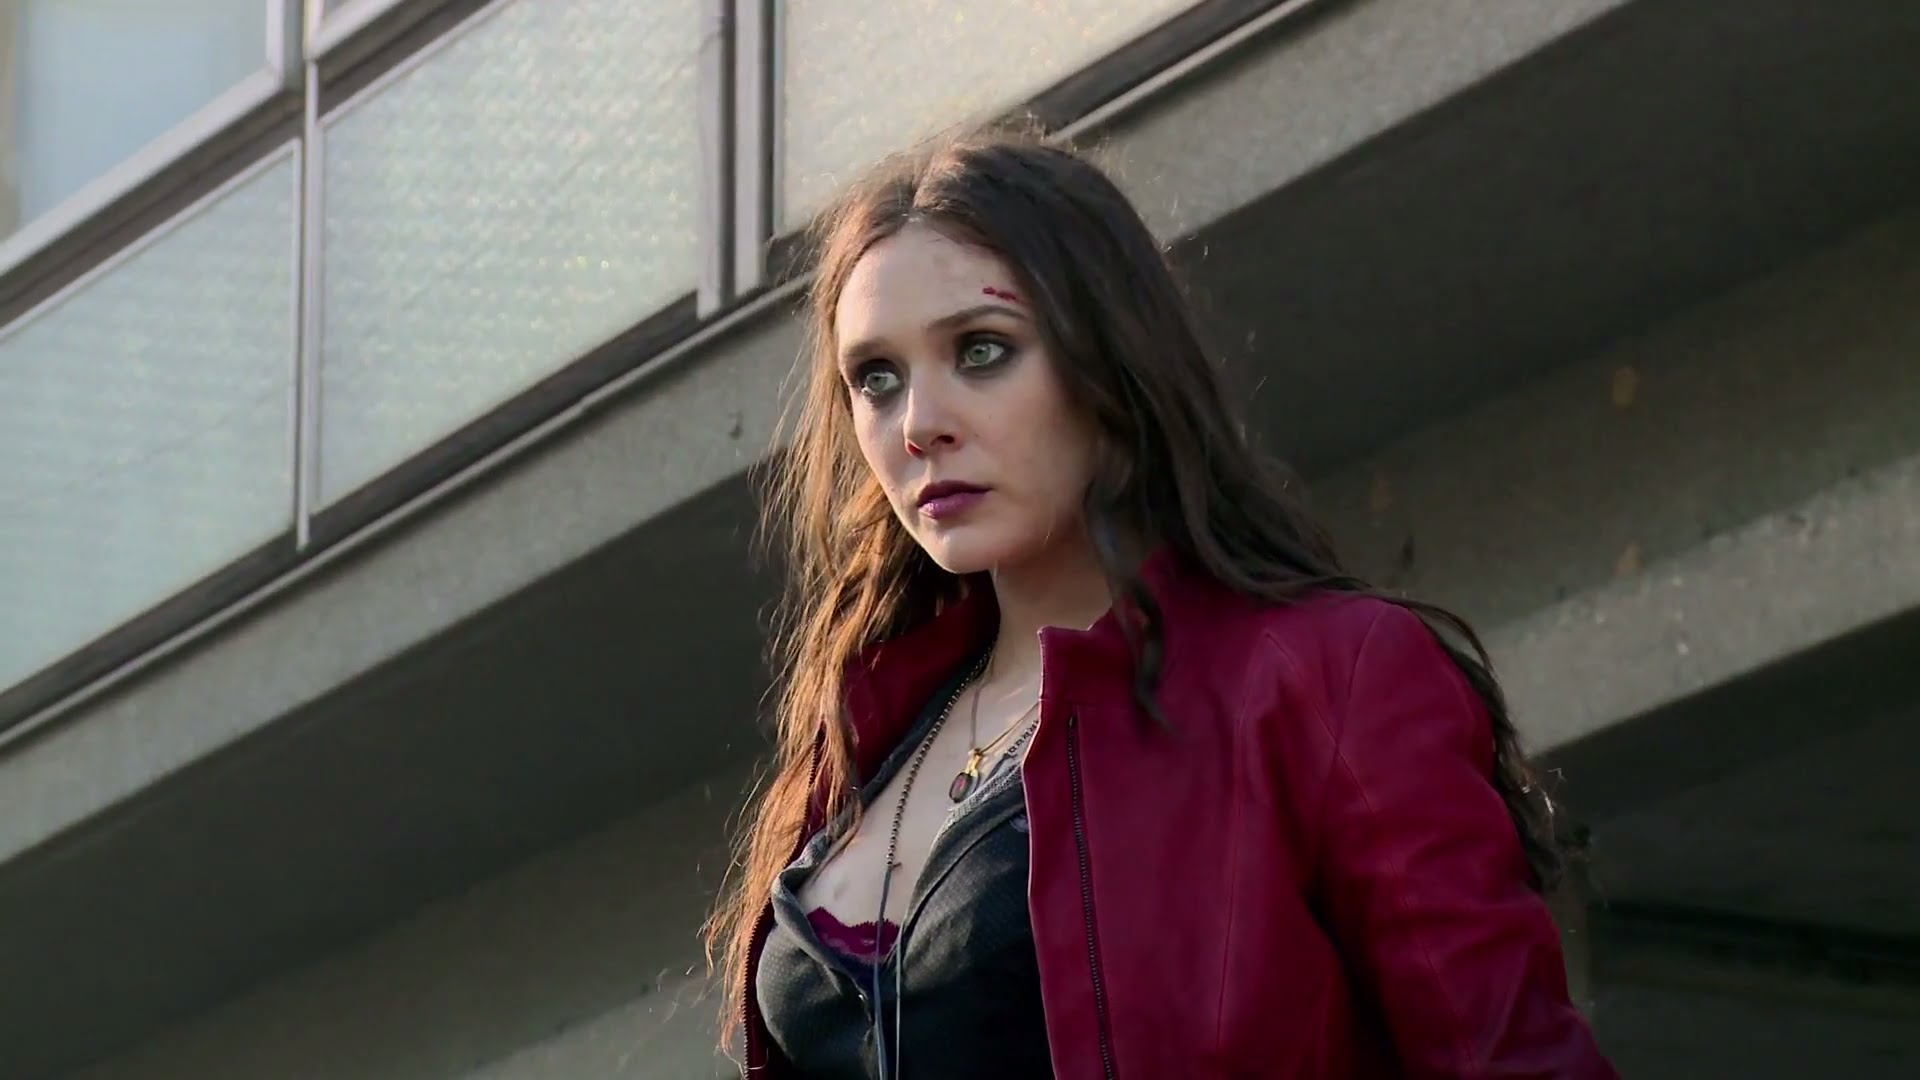 80+ Wanda Maximoff HD Wallpapers and Backgrounds